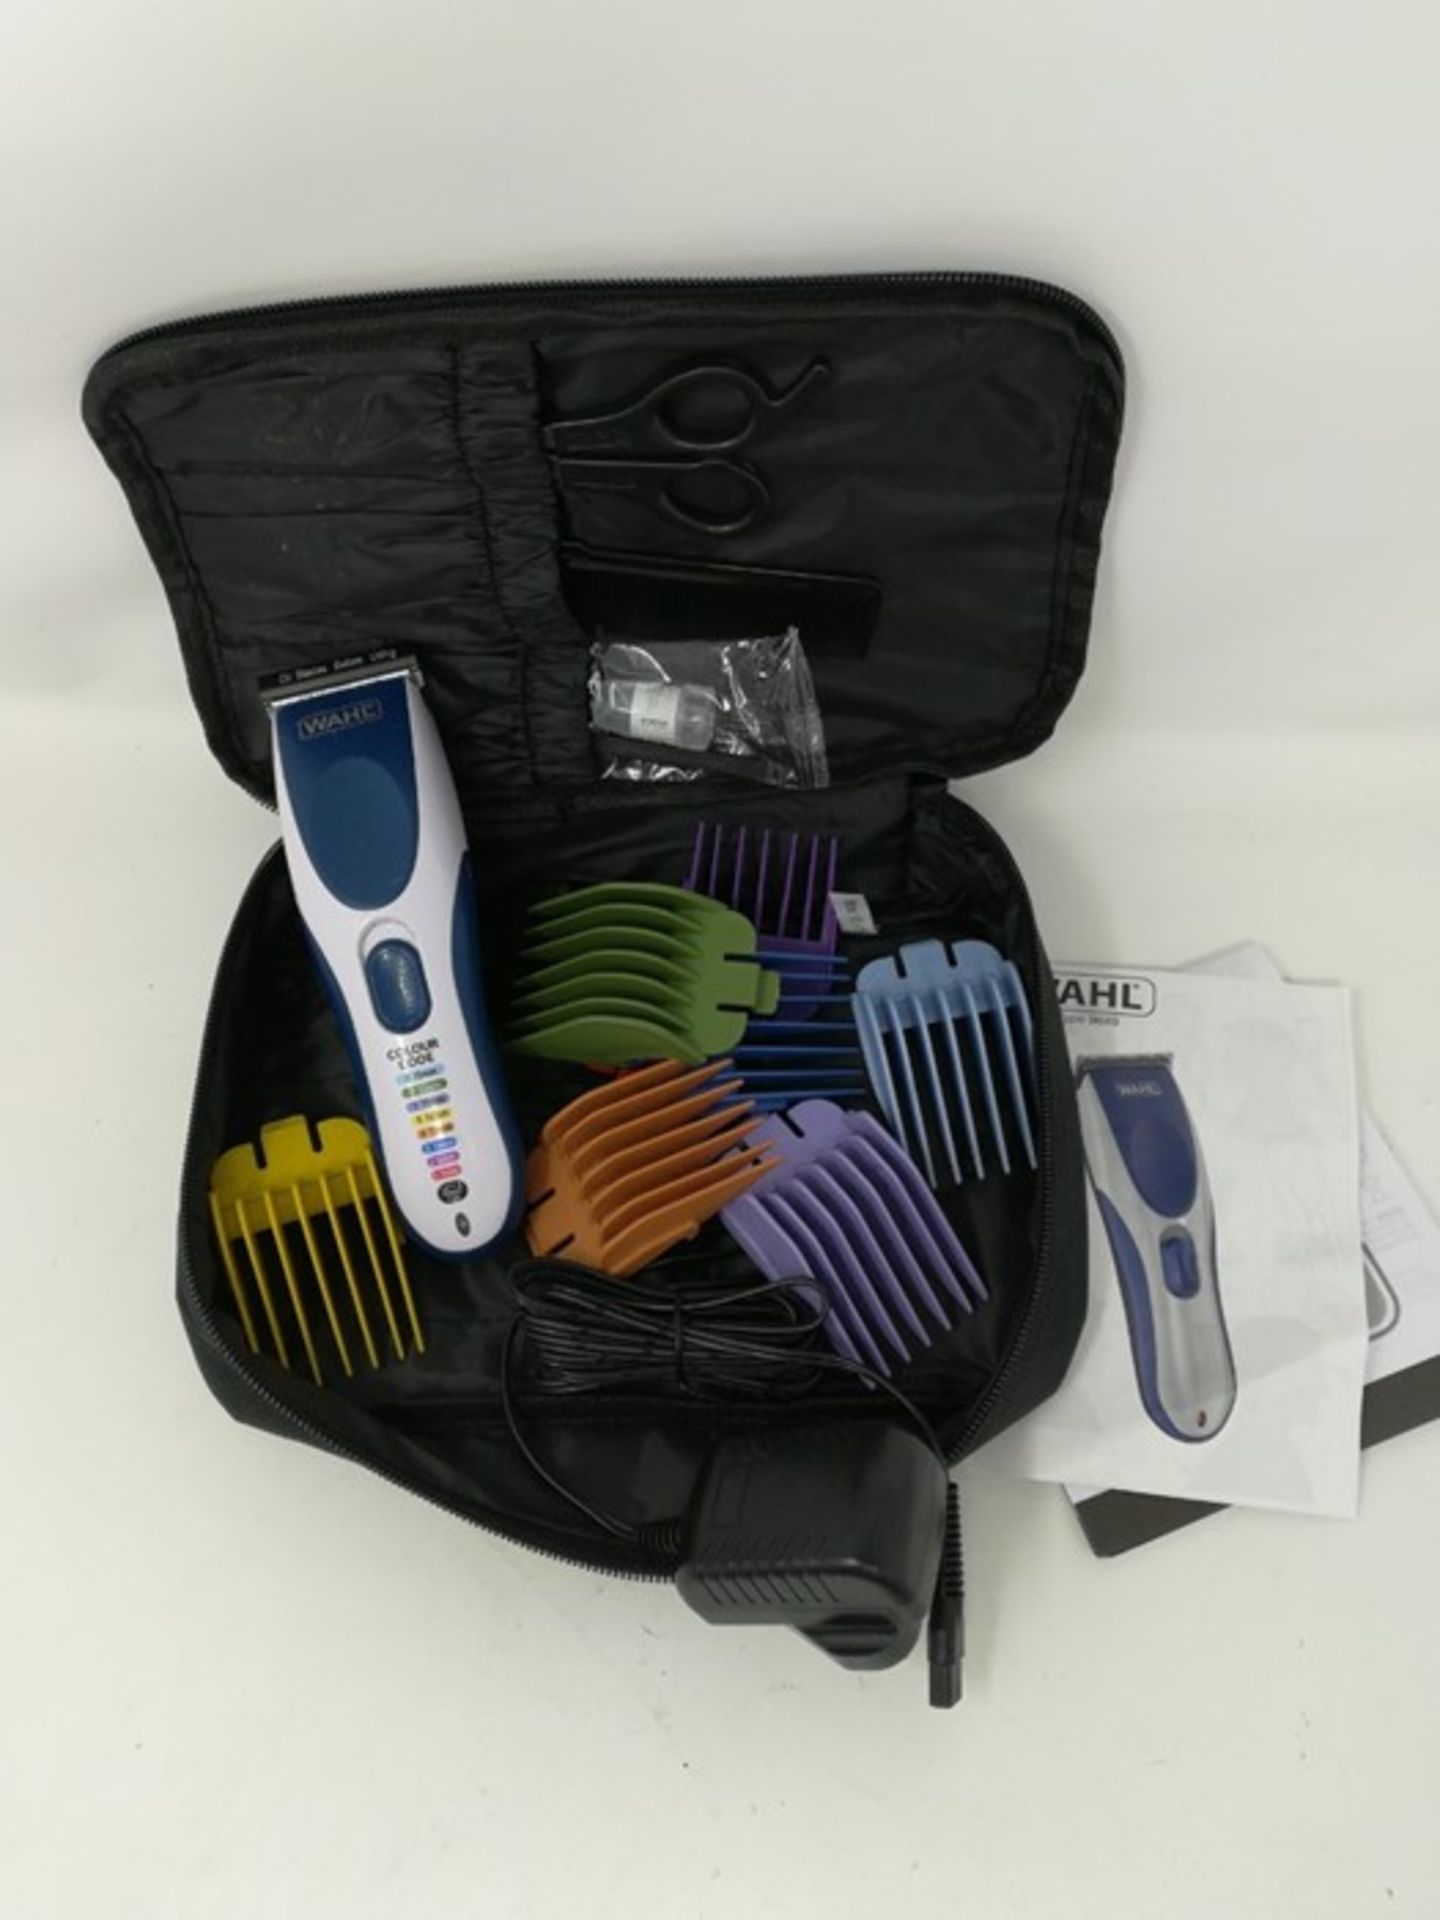 Wahl Hair Clippers for Men, Colour Pro Cordless - Image 2 of 2